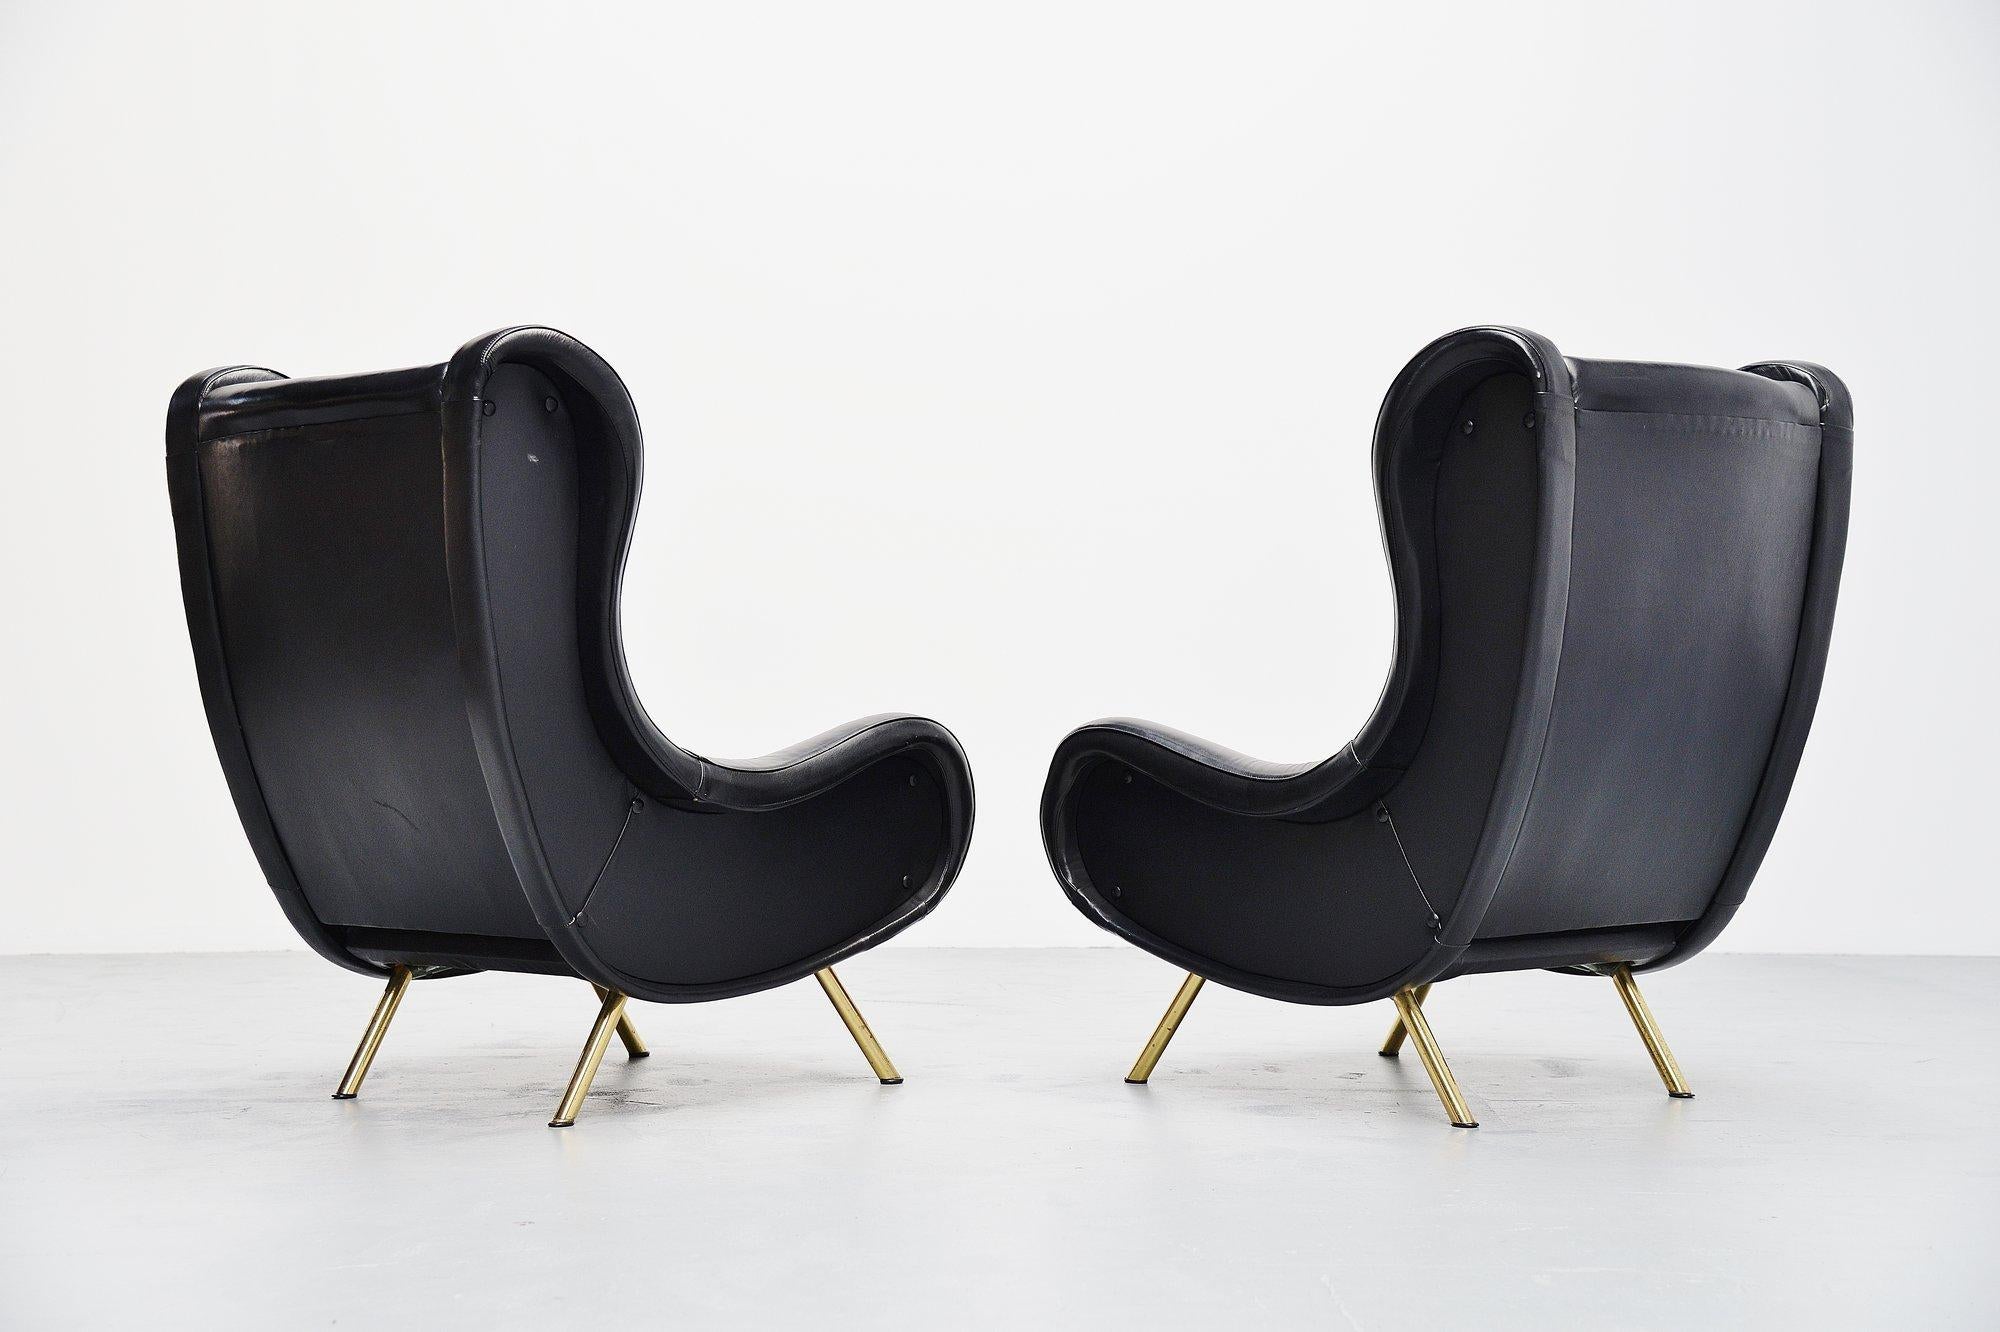 Fantastic iconic lounge chair pair designed by world known designer Marco Zanuso and manufactured by Arflex, Italy 1951. These two lounge chairs have their original leather upholstery which is quite rare for these chairs. The condition of the